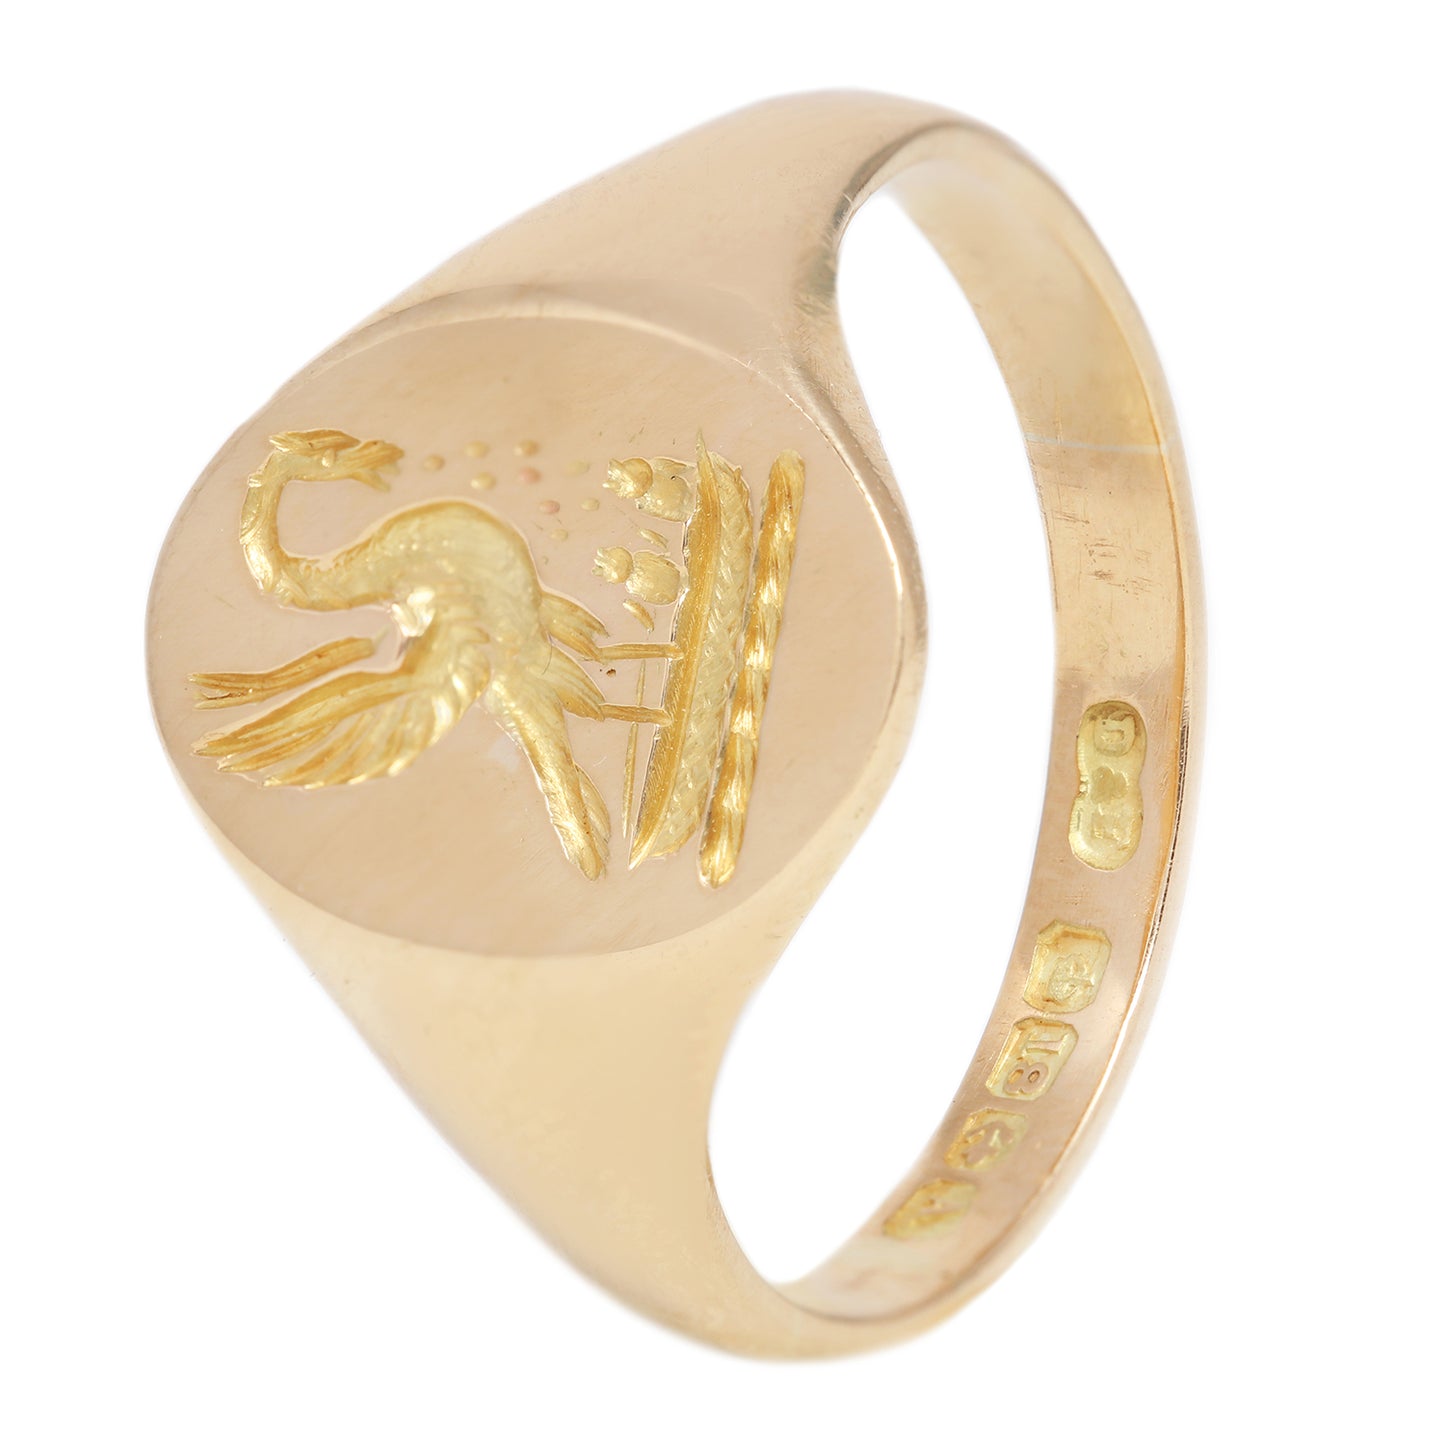 Hydra Crested Signet Ring